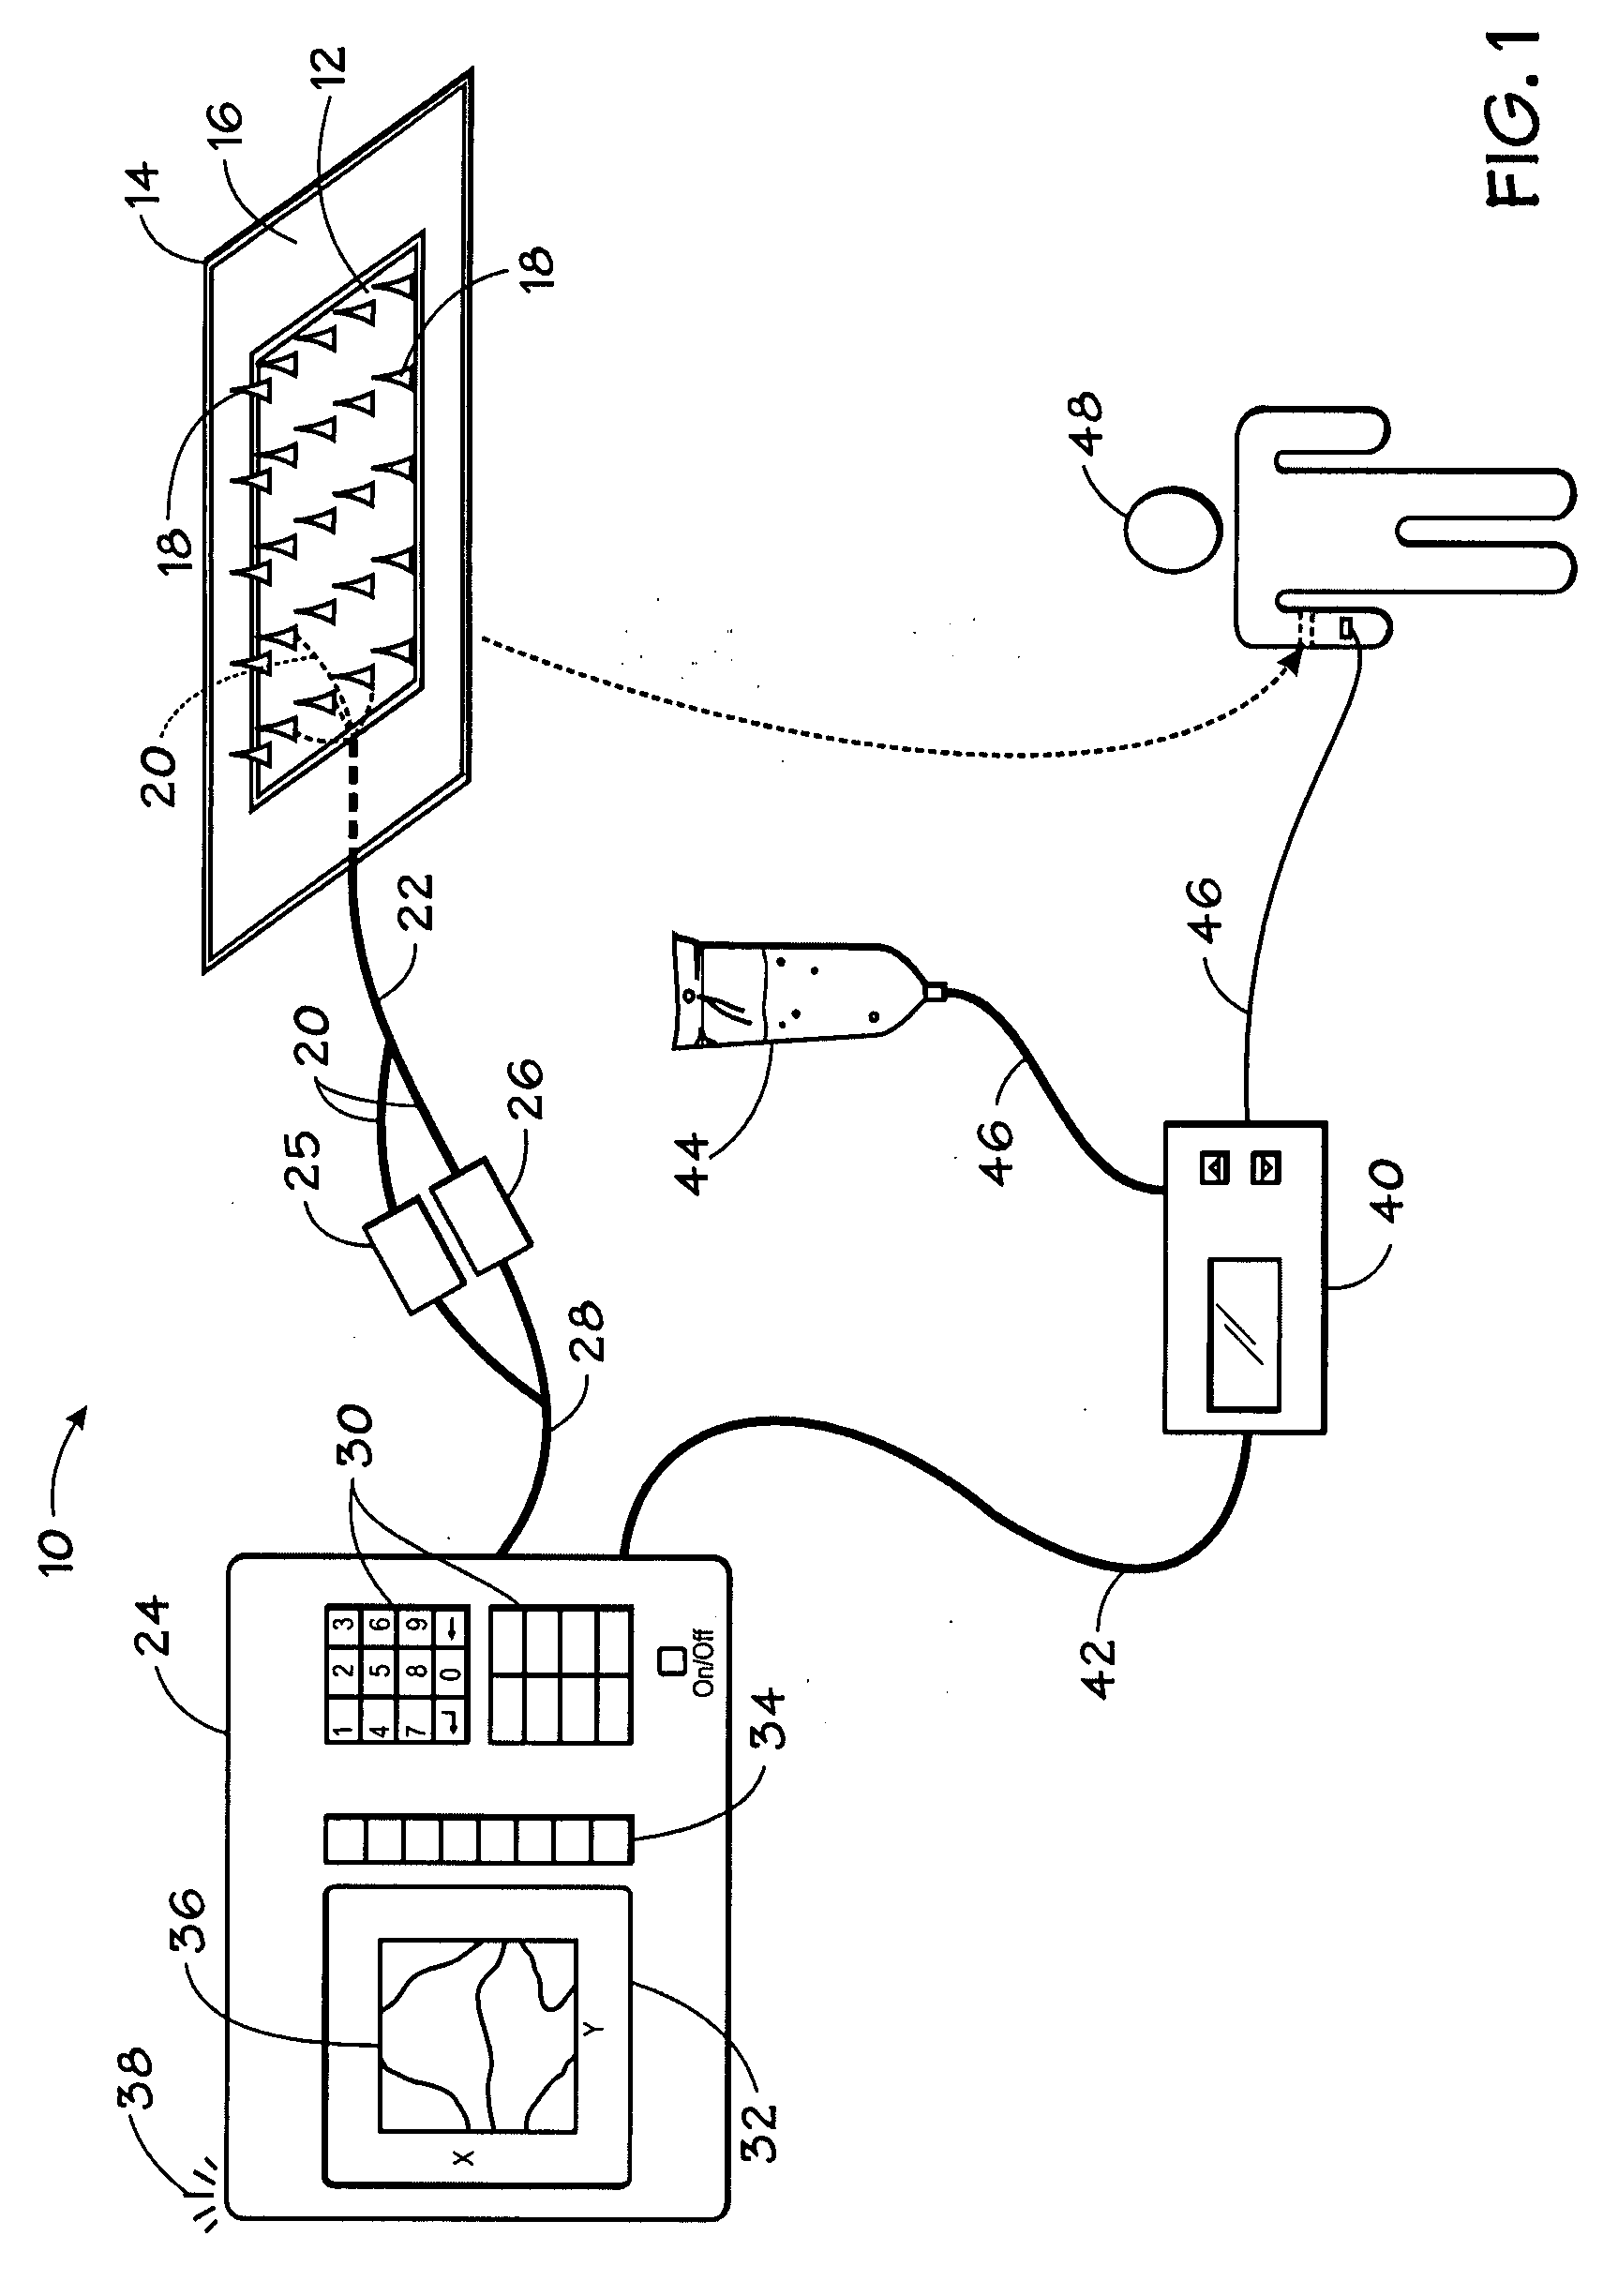 System and methods for optical sensing and drug delivery using microneedles